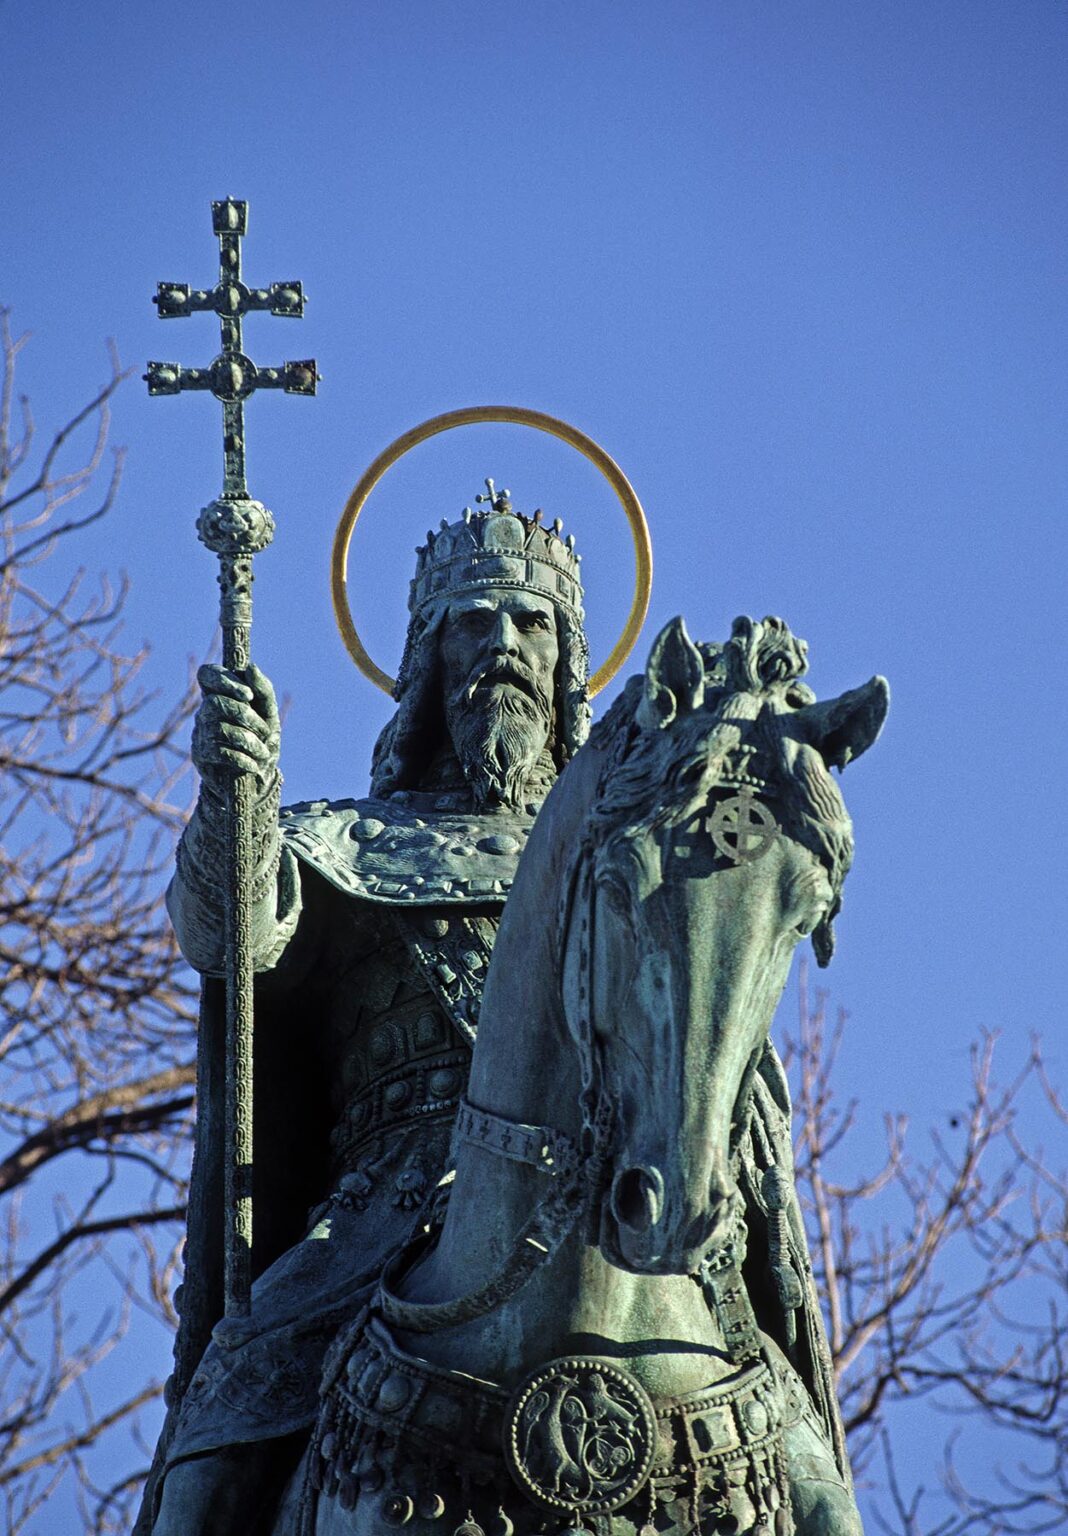 Statue of ST STEPHEN (977-1038 AD), HUNGARY'S first king, stands near MATTHIAS CHURCH - BUDAPEST